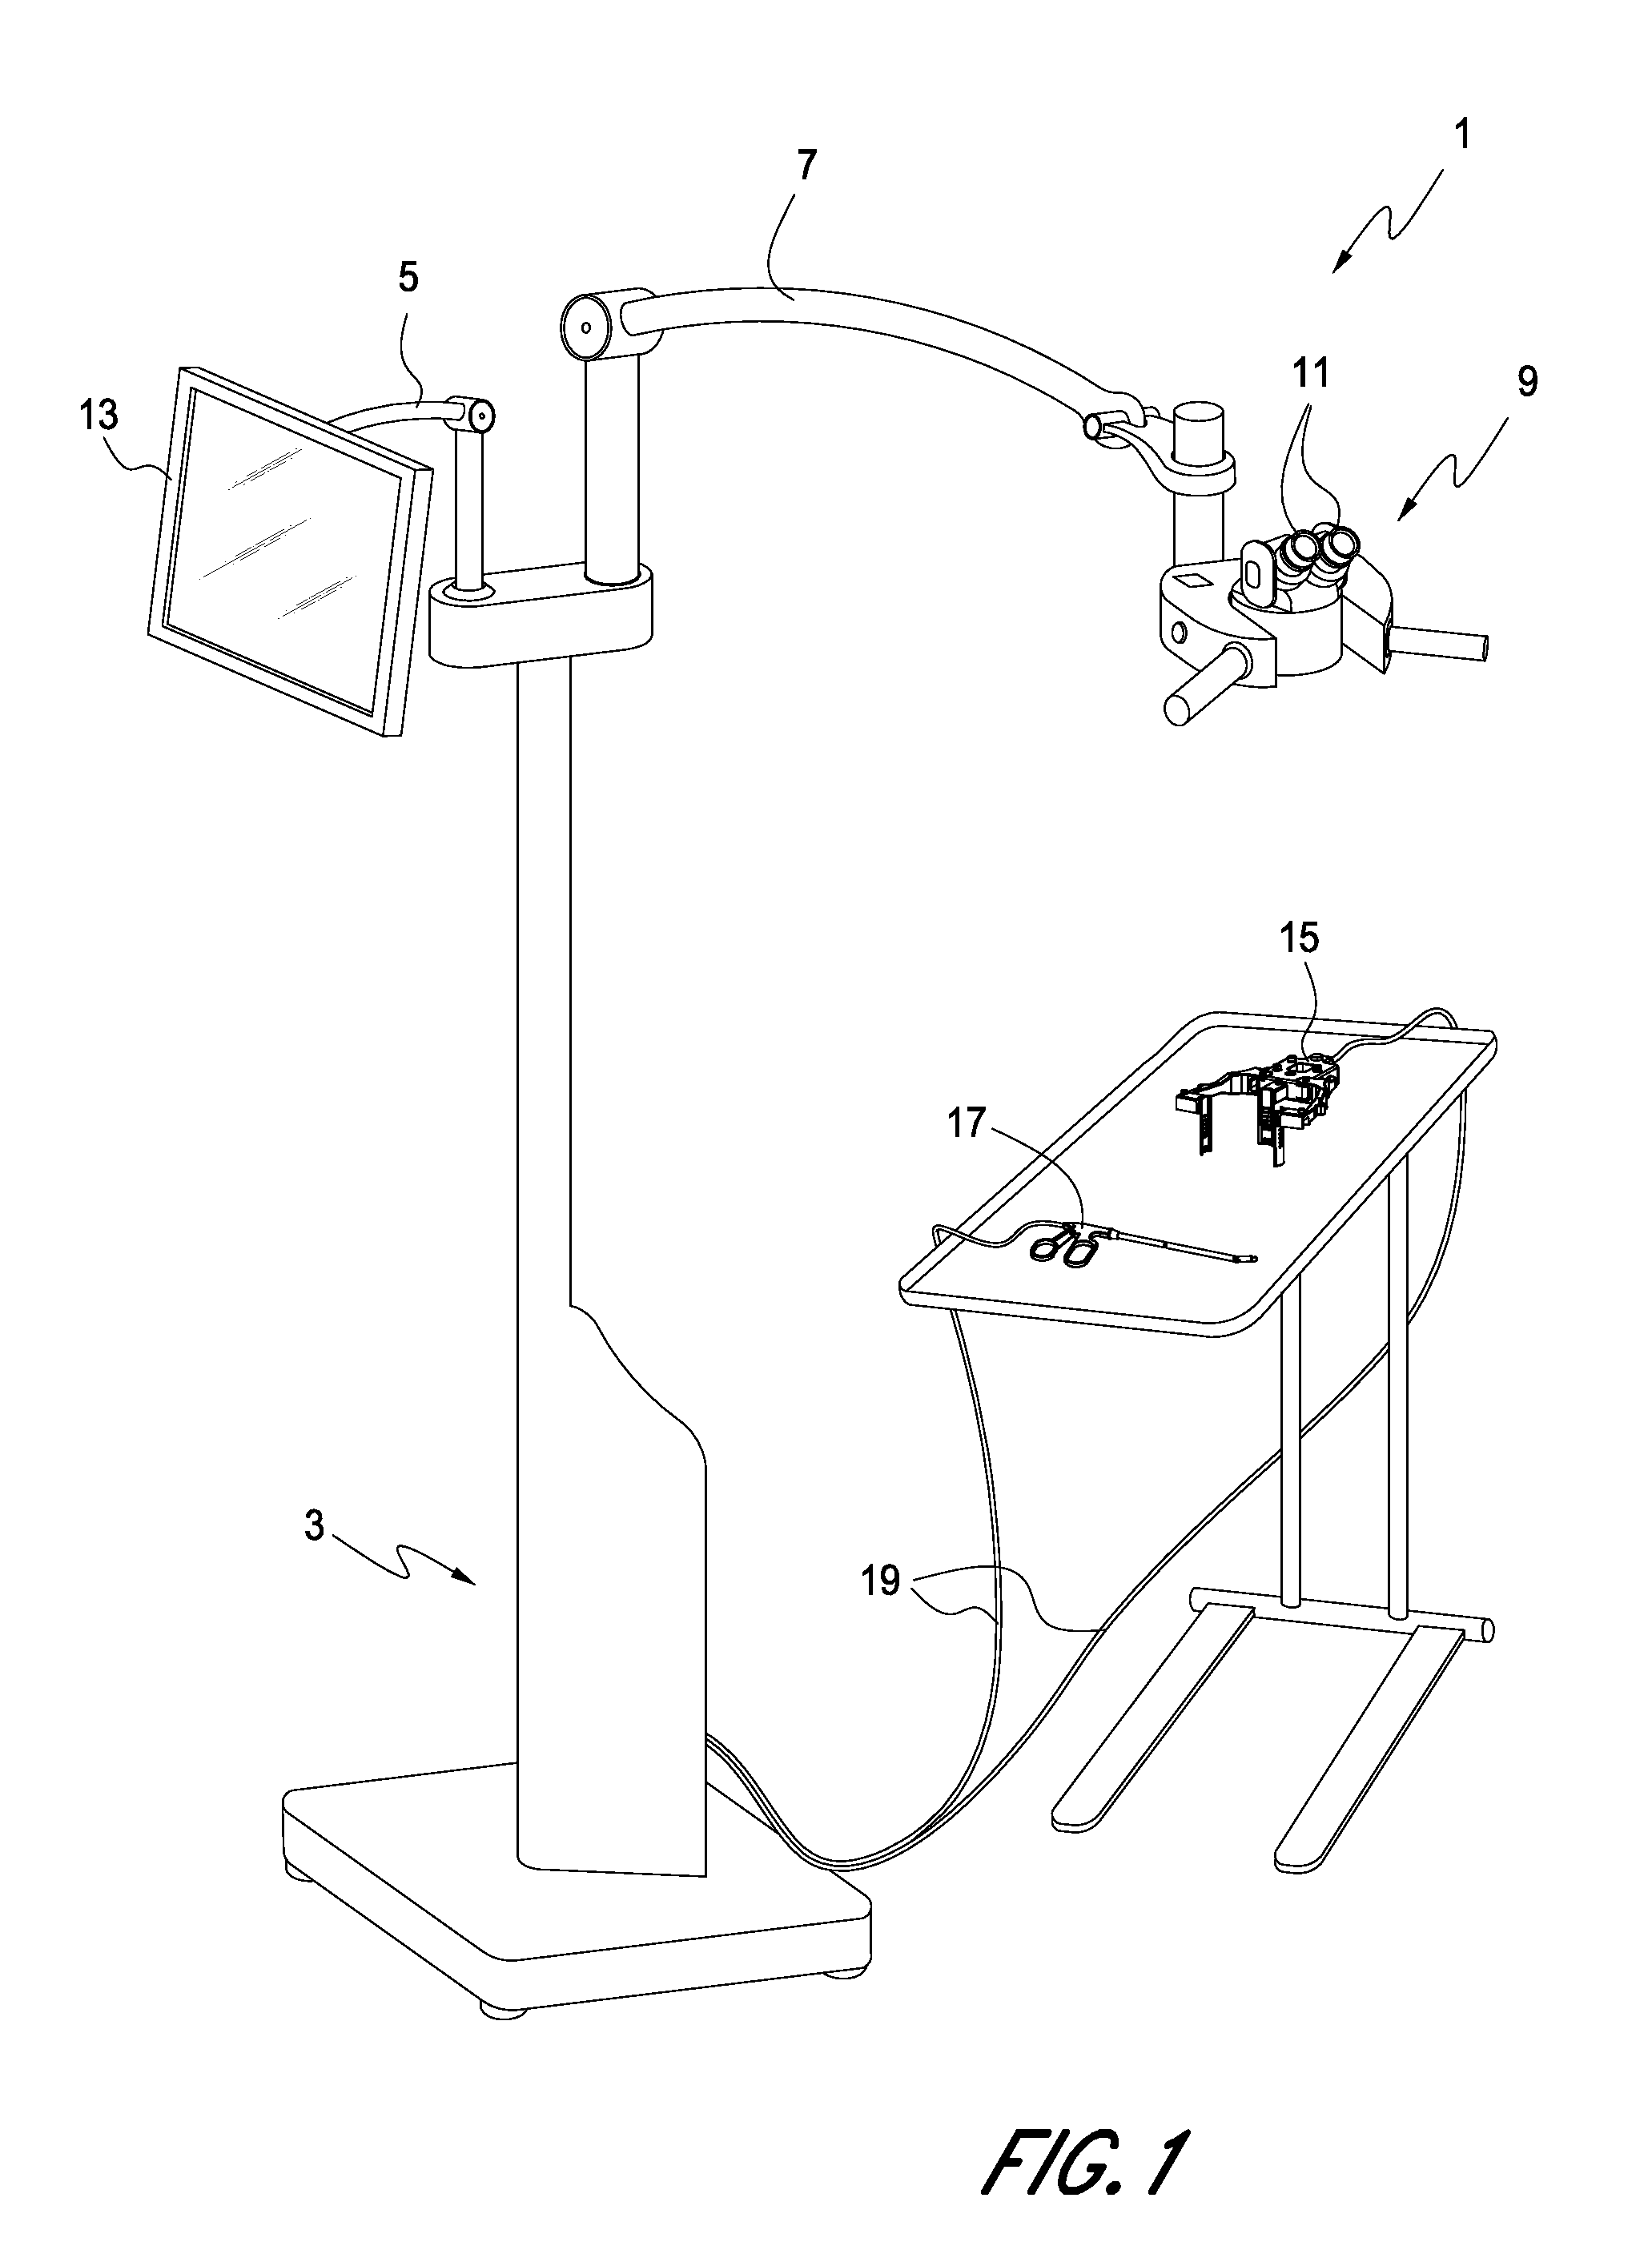 Binocular viewing assembly for a surgical visualization system